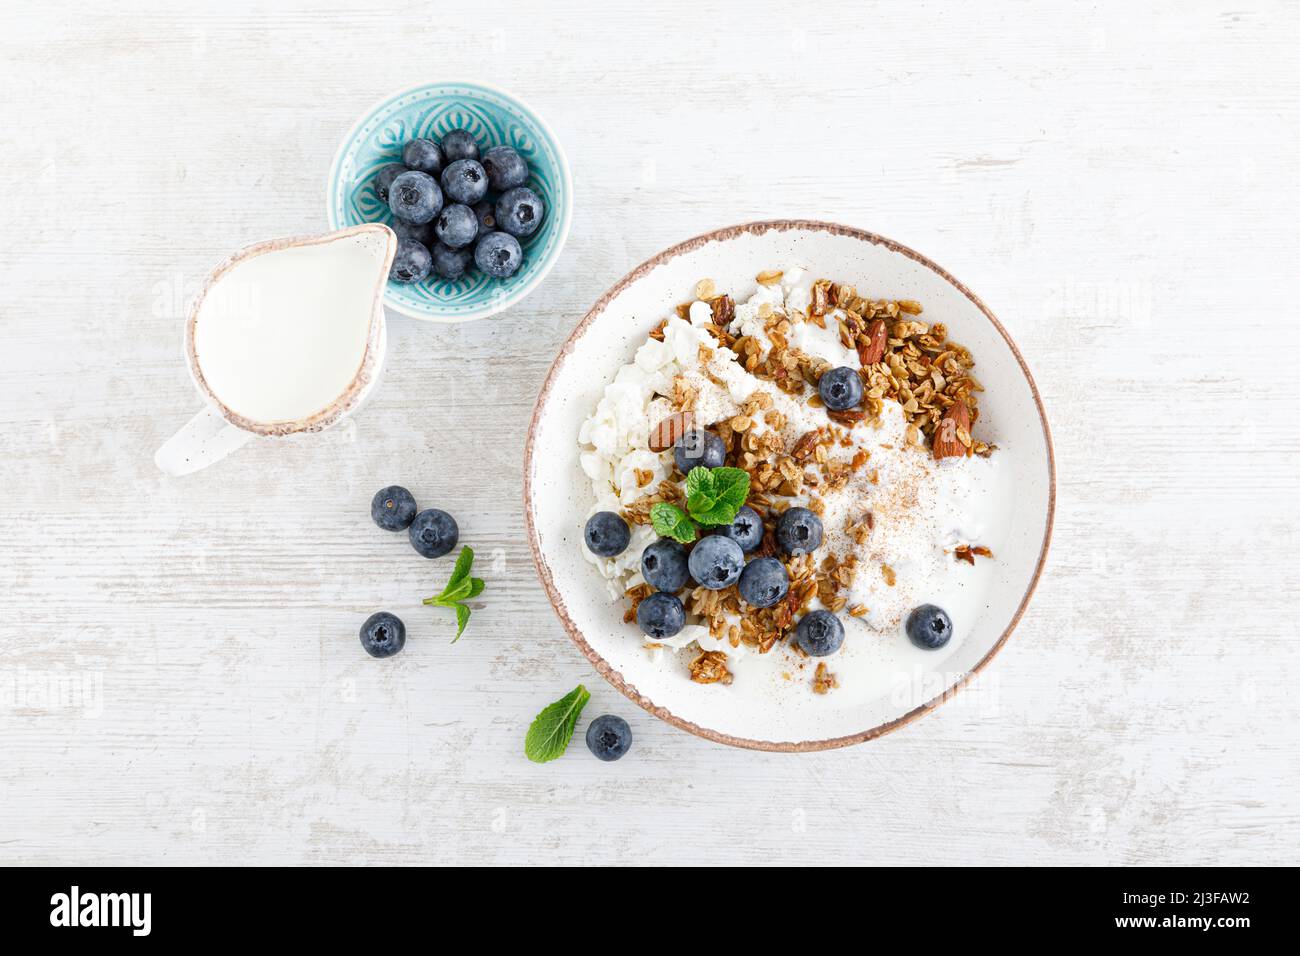 Bowl of granola with fresh blueberry, cottage cheese or curd, yogurt and nuts. Healthy food. Breakfast. Top view Stock Photo